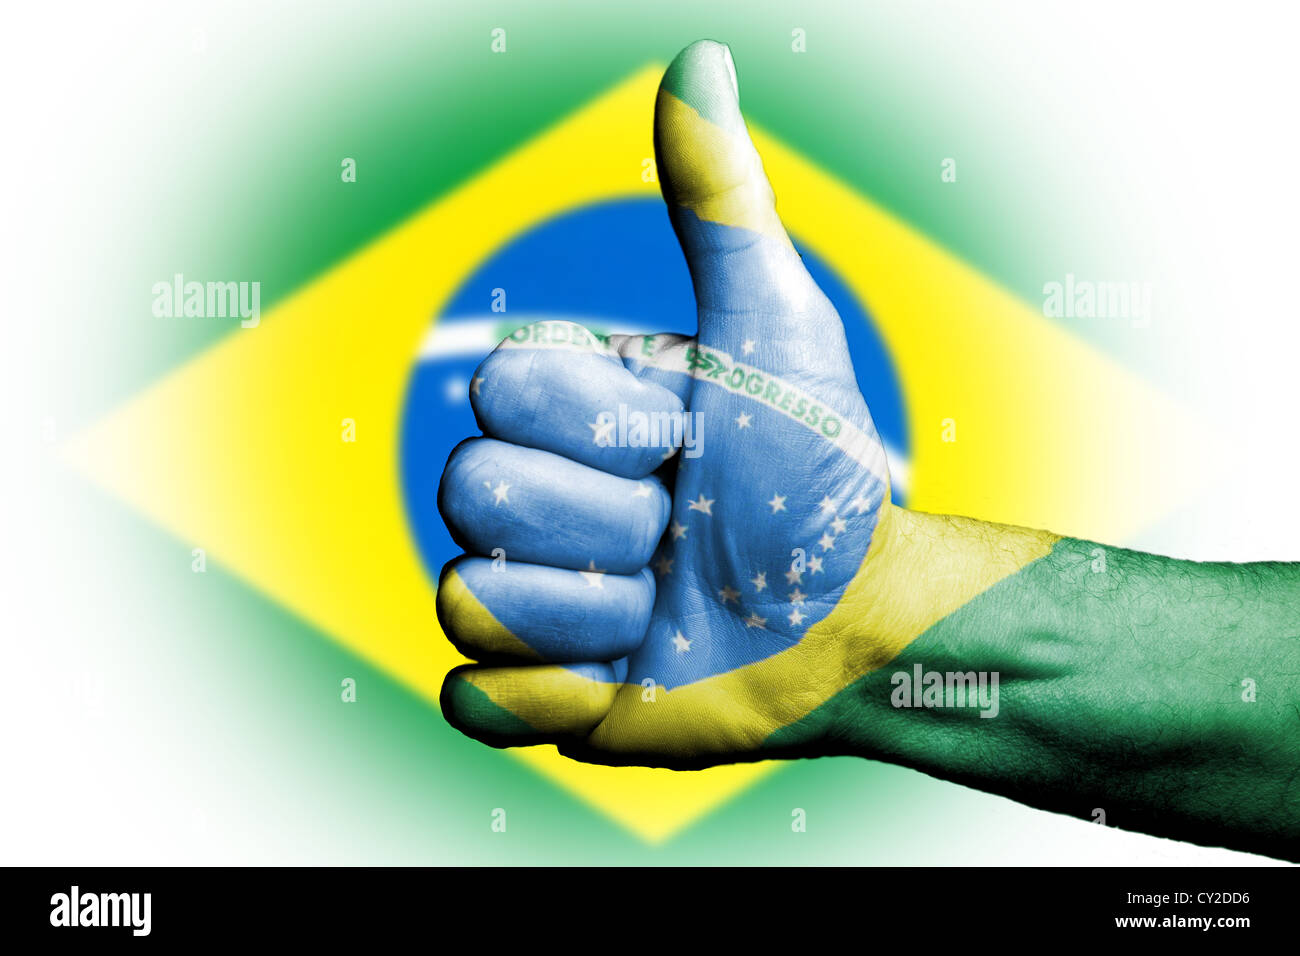 Thumbs up for to Brazil Brazilians, sporting metaphor we are going to win prevail,vote of confidence for country and people. Stock Photo